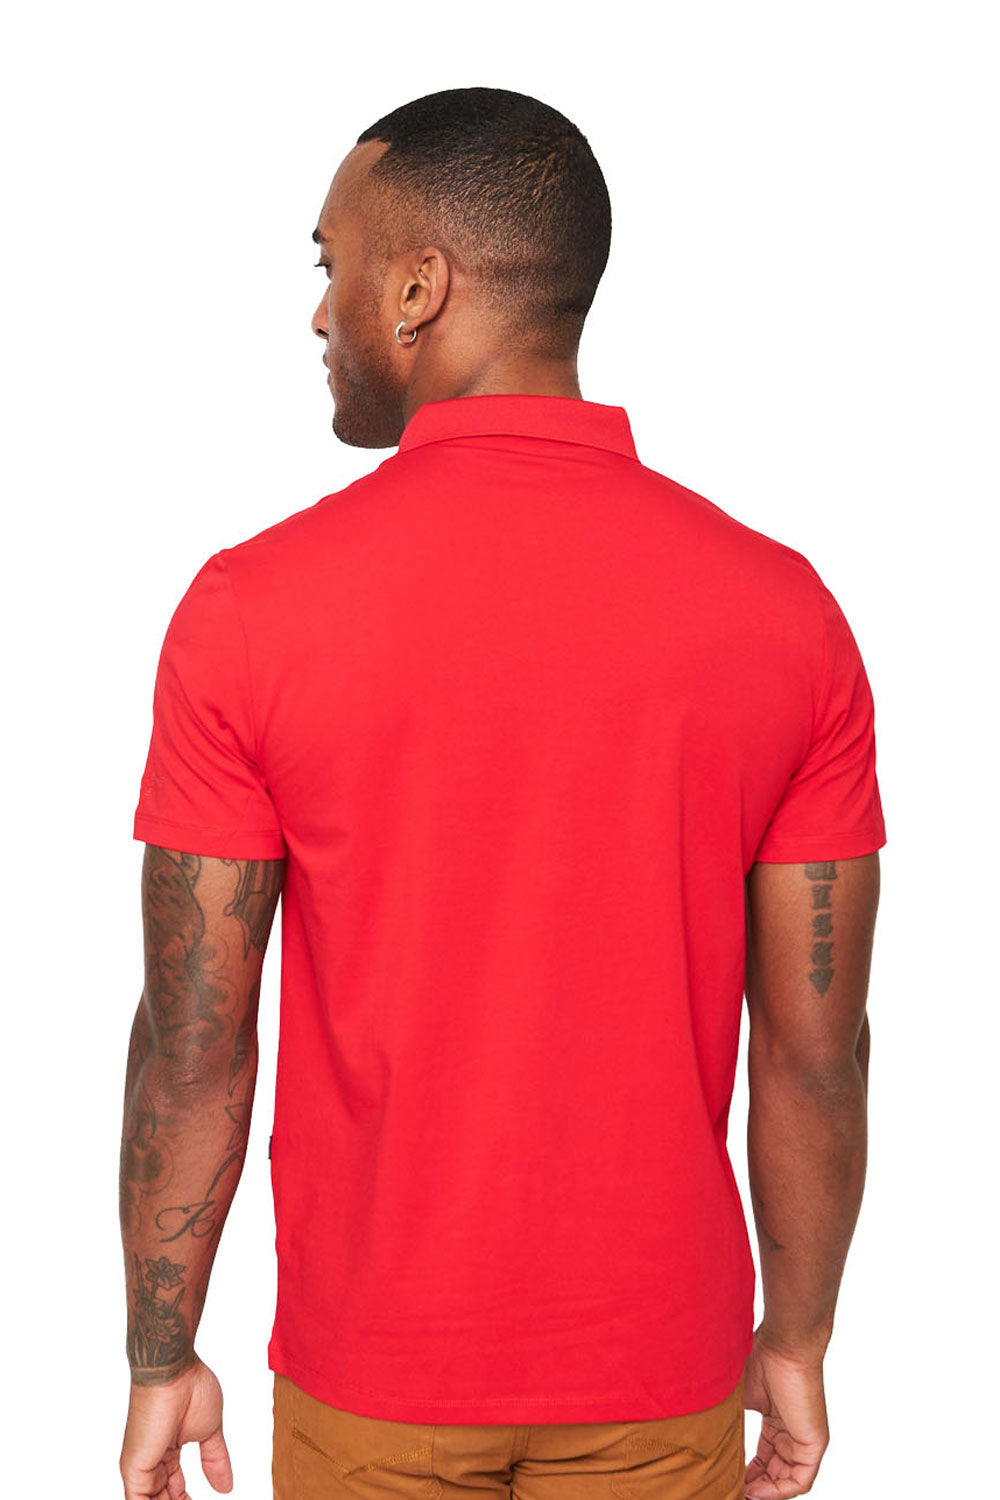 Barabas Men's Solid Color Print Graphic Tee Polo Shirts PP818 Red